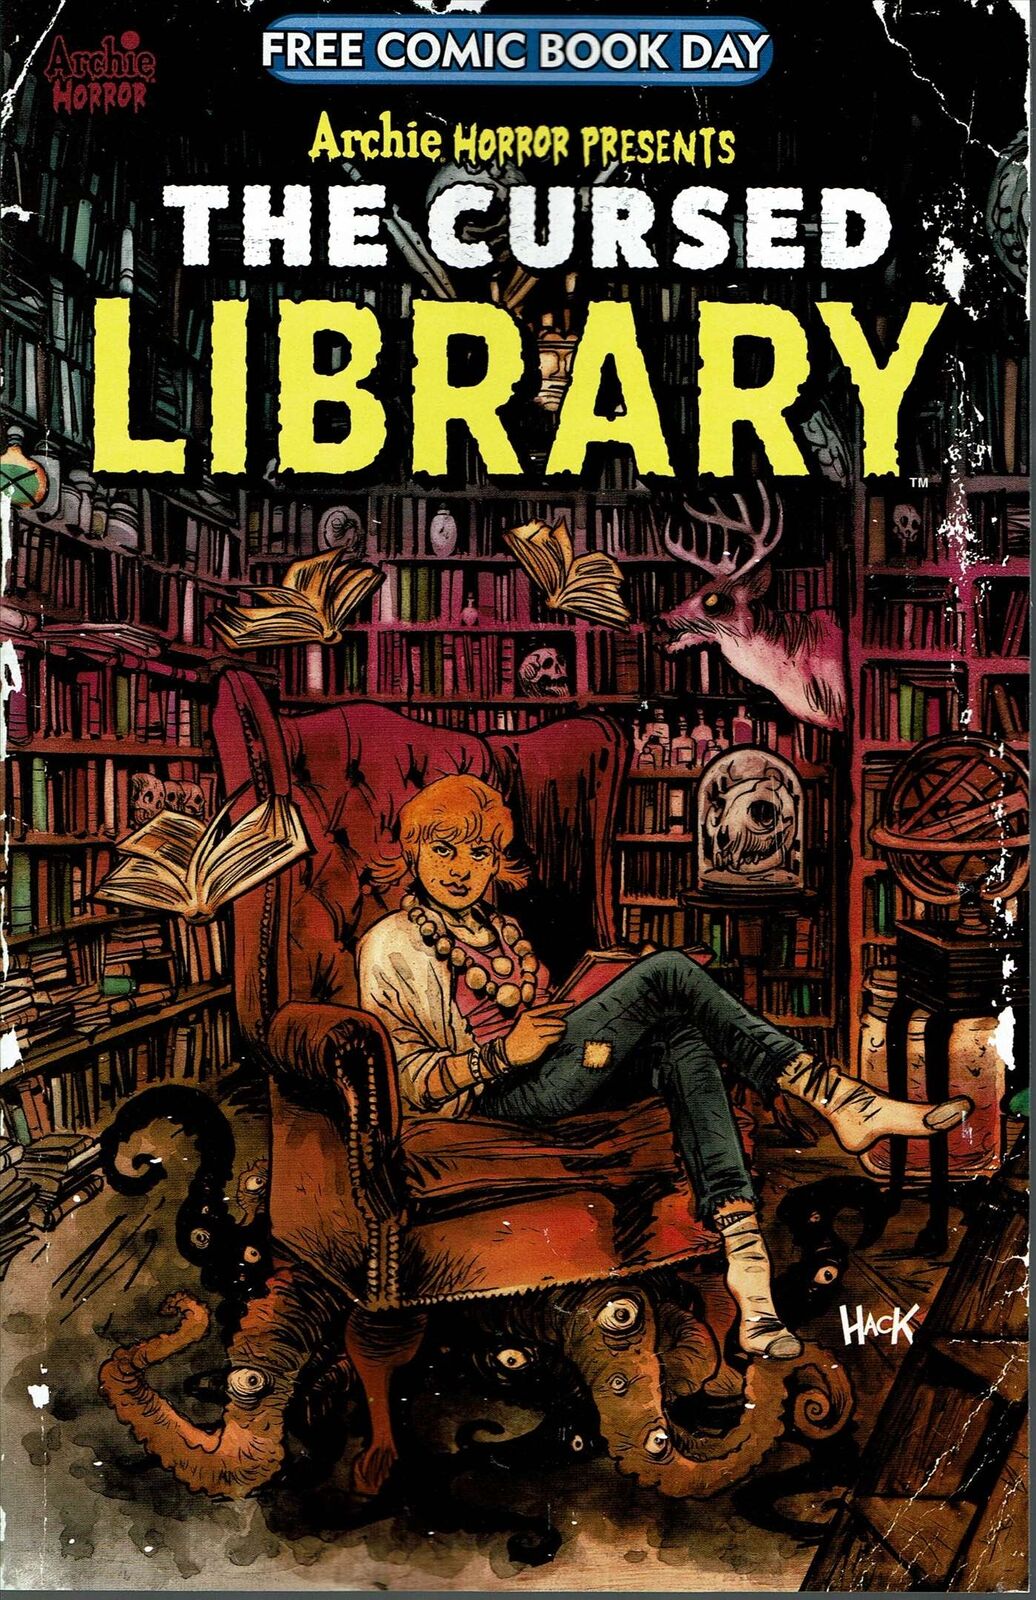 Archie Horror Presents: The Cursed Library FCBD #0 VF/NM; Archie | we combine sh